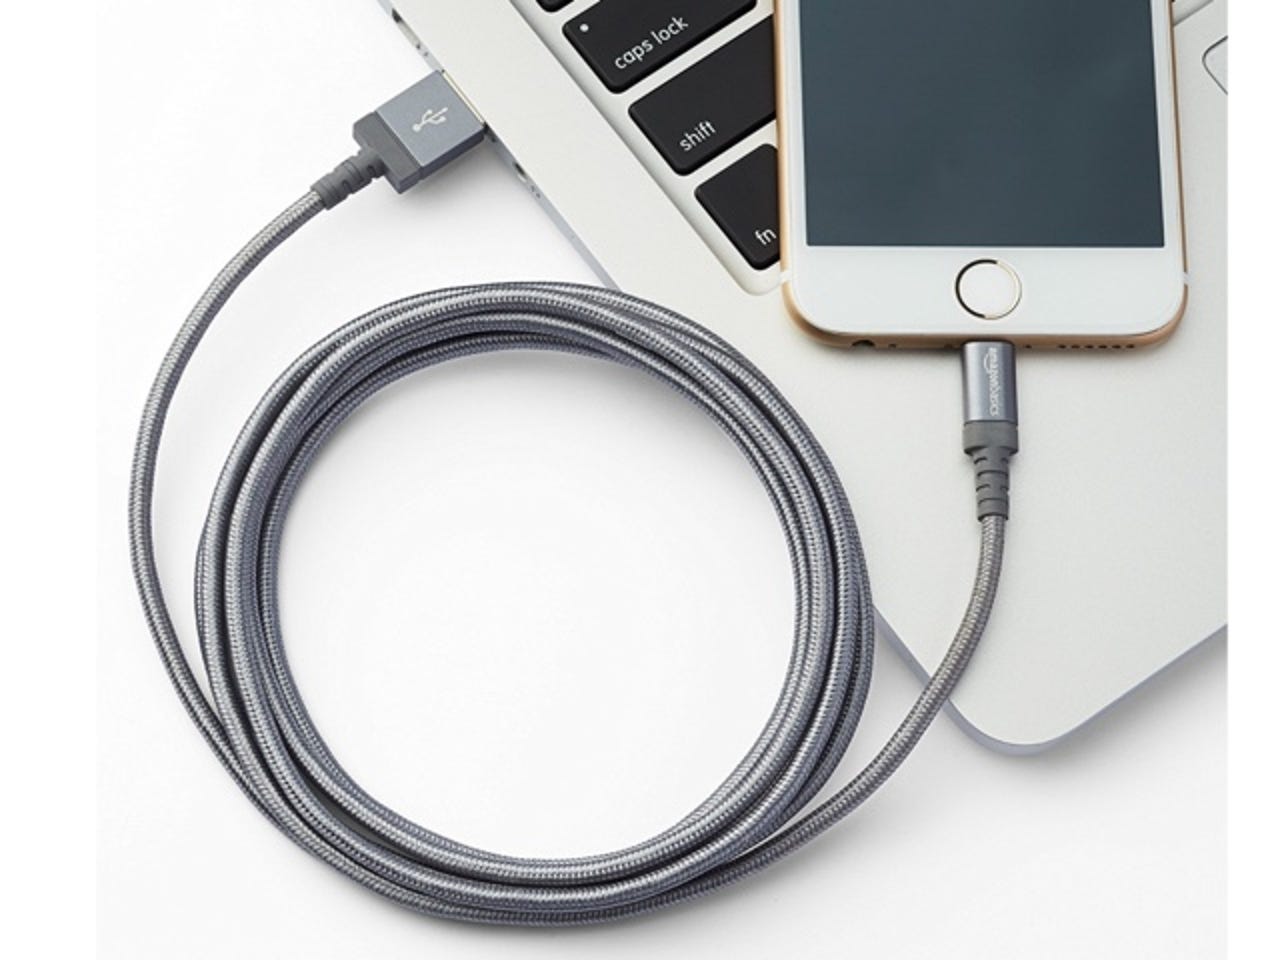 AmazonBasics 6-foot braided USB A to Lightning cable